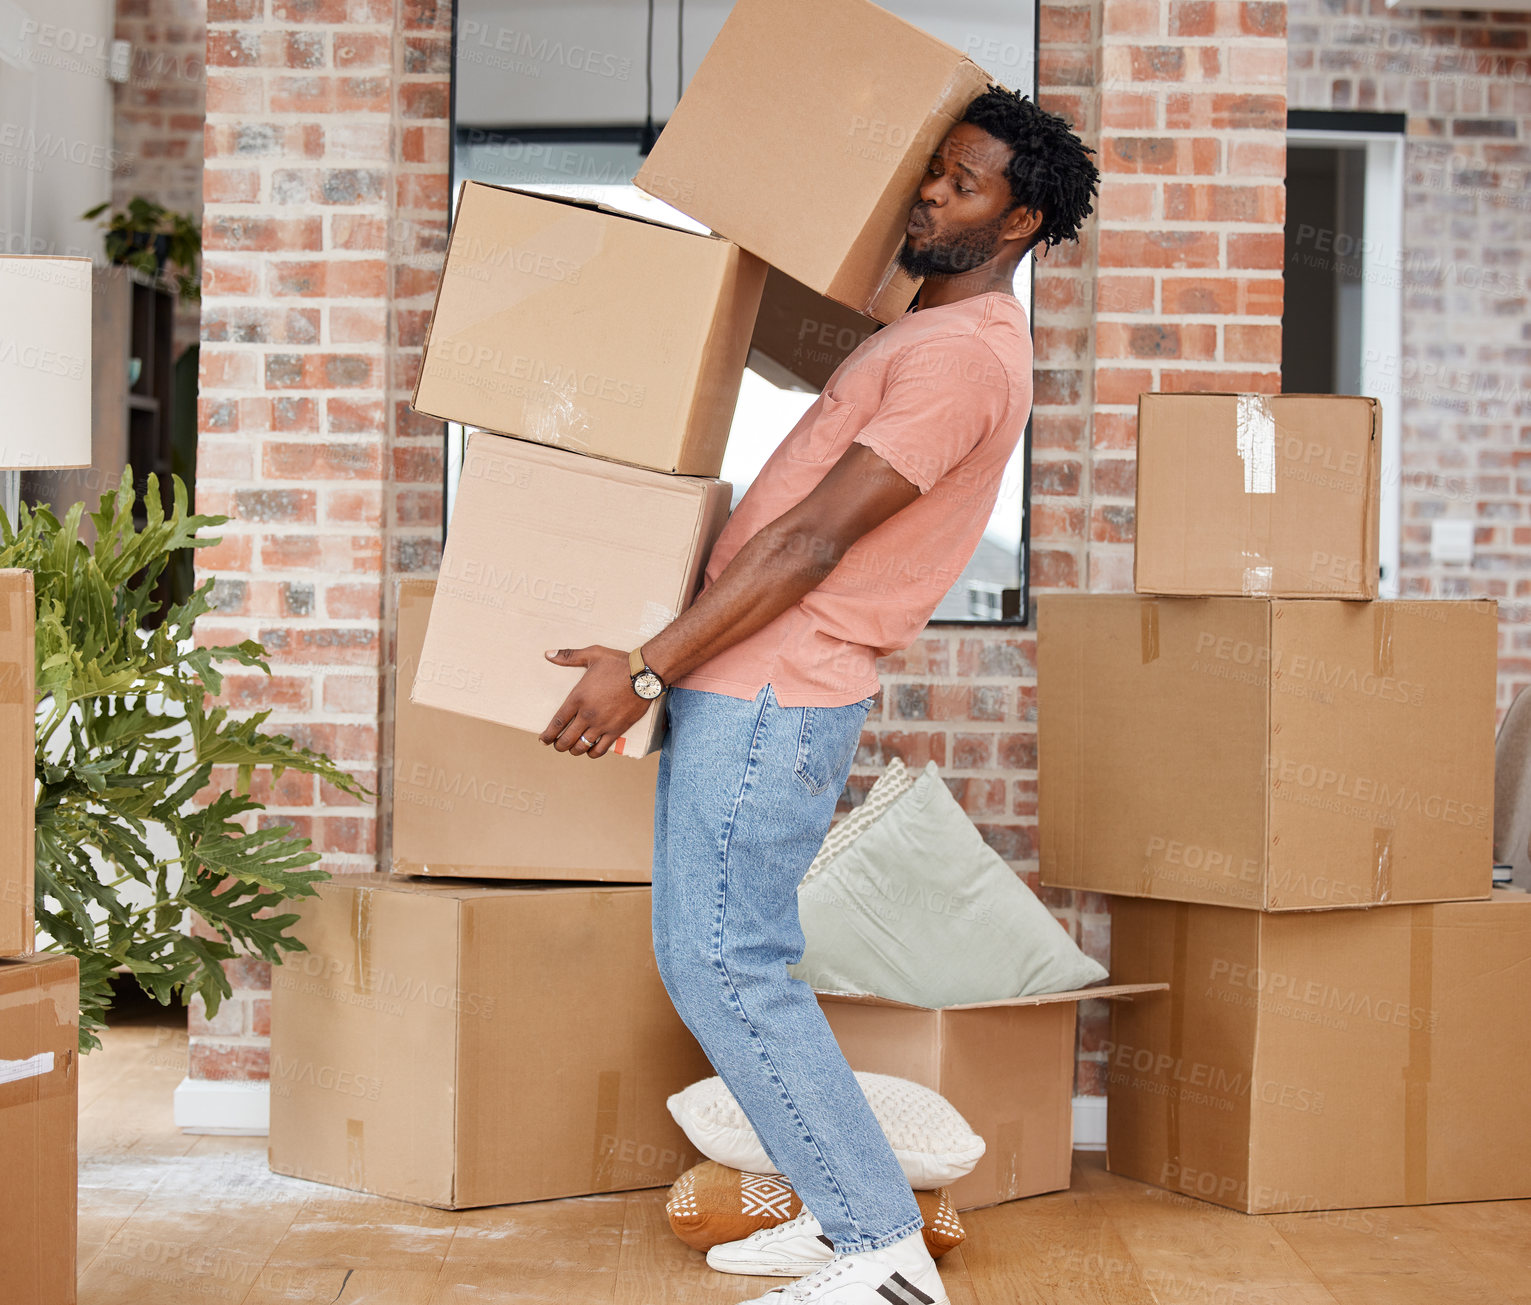 Buy stock photo Shot of a man carrying boxes into his new home